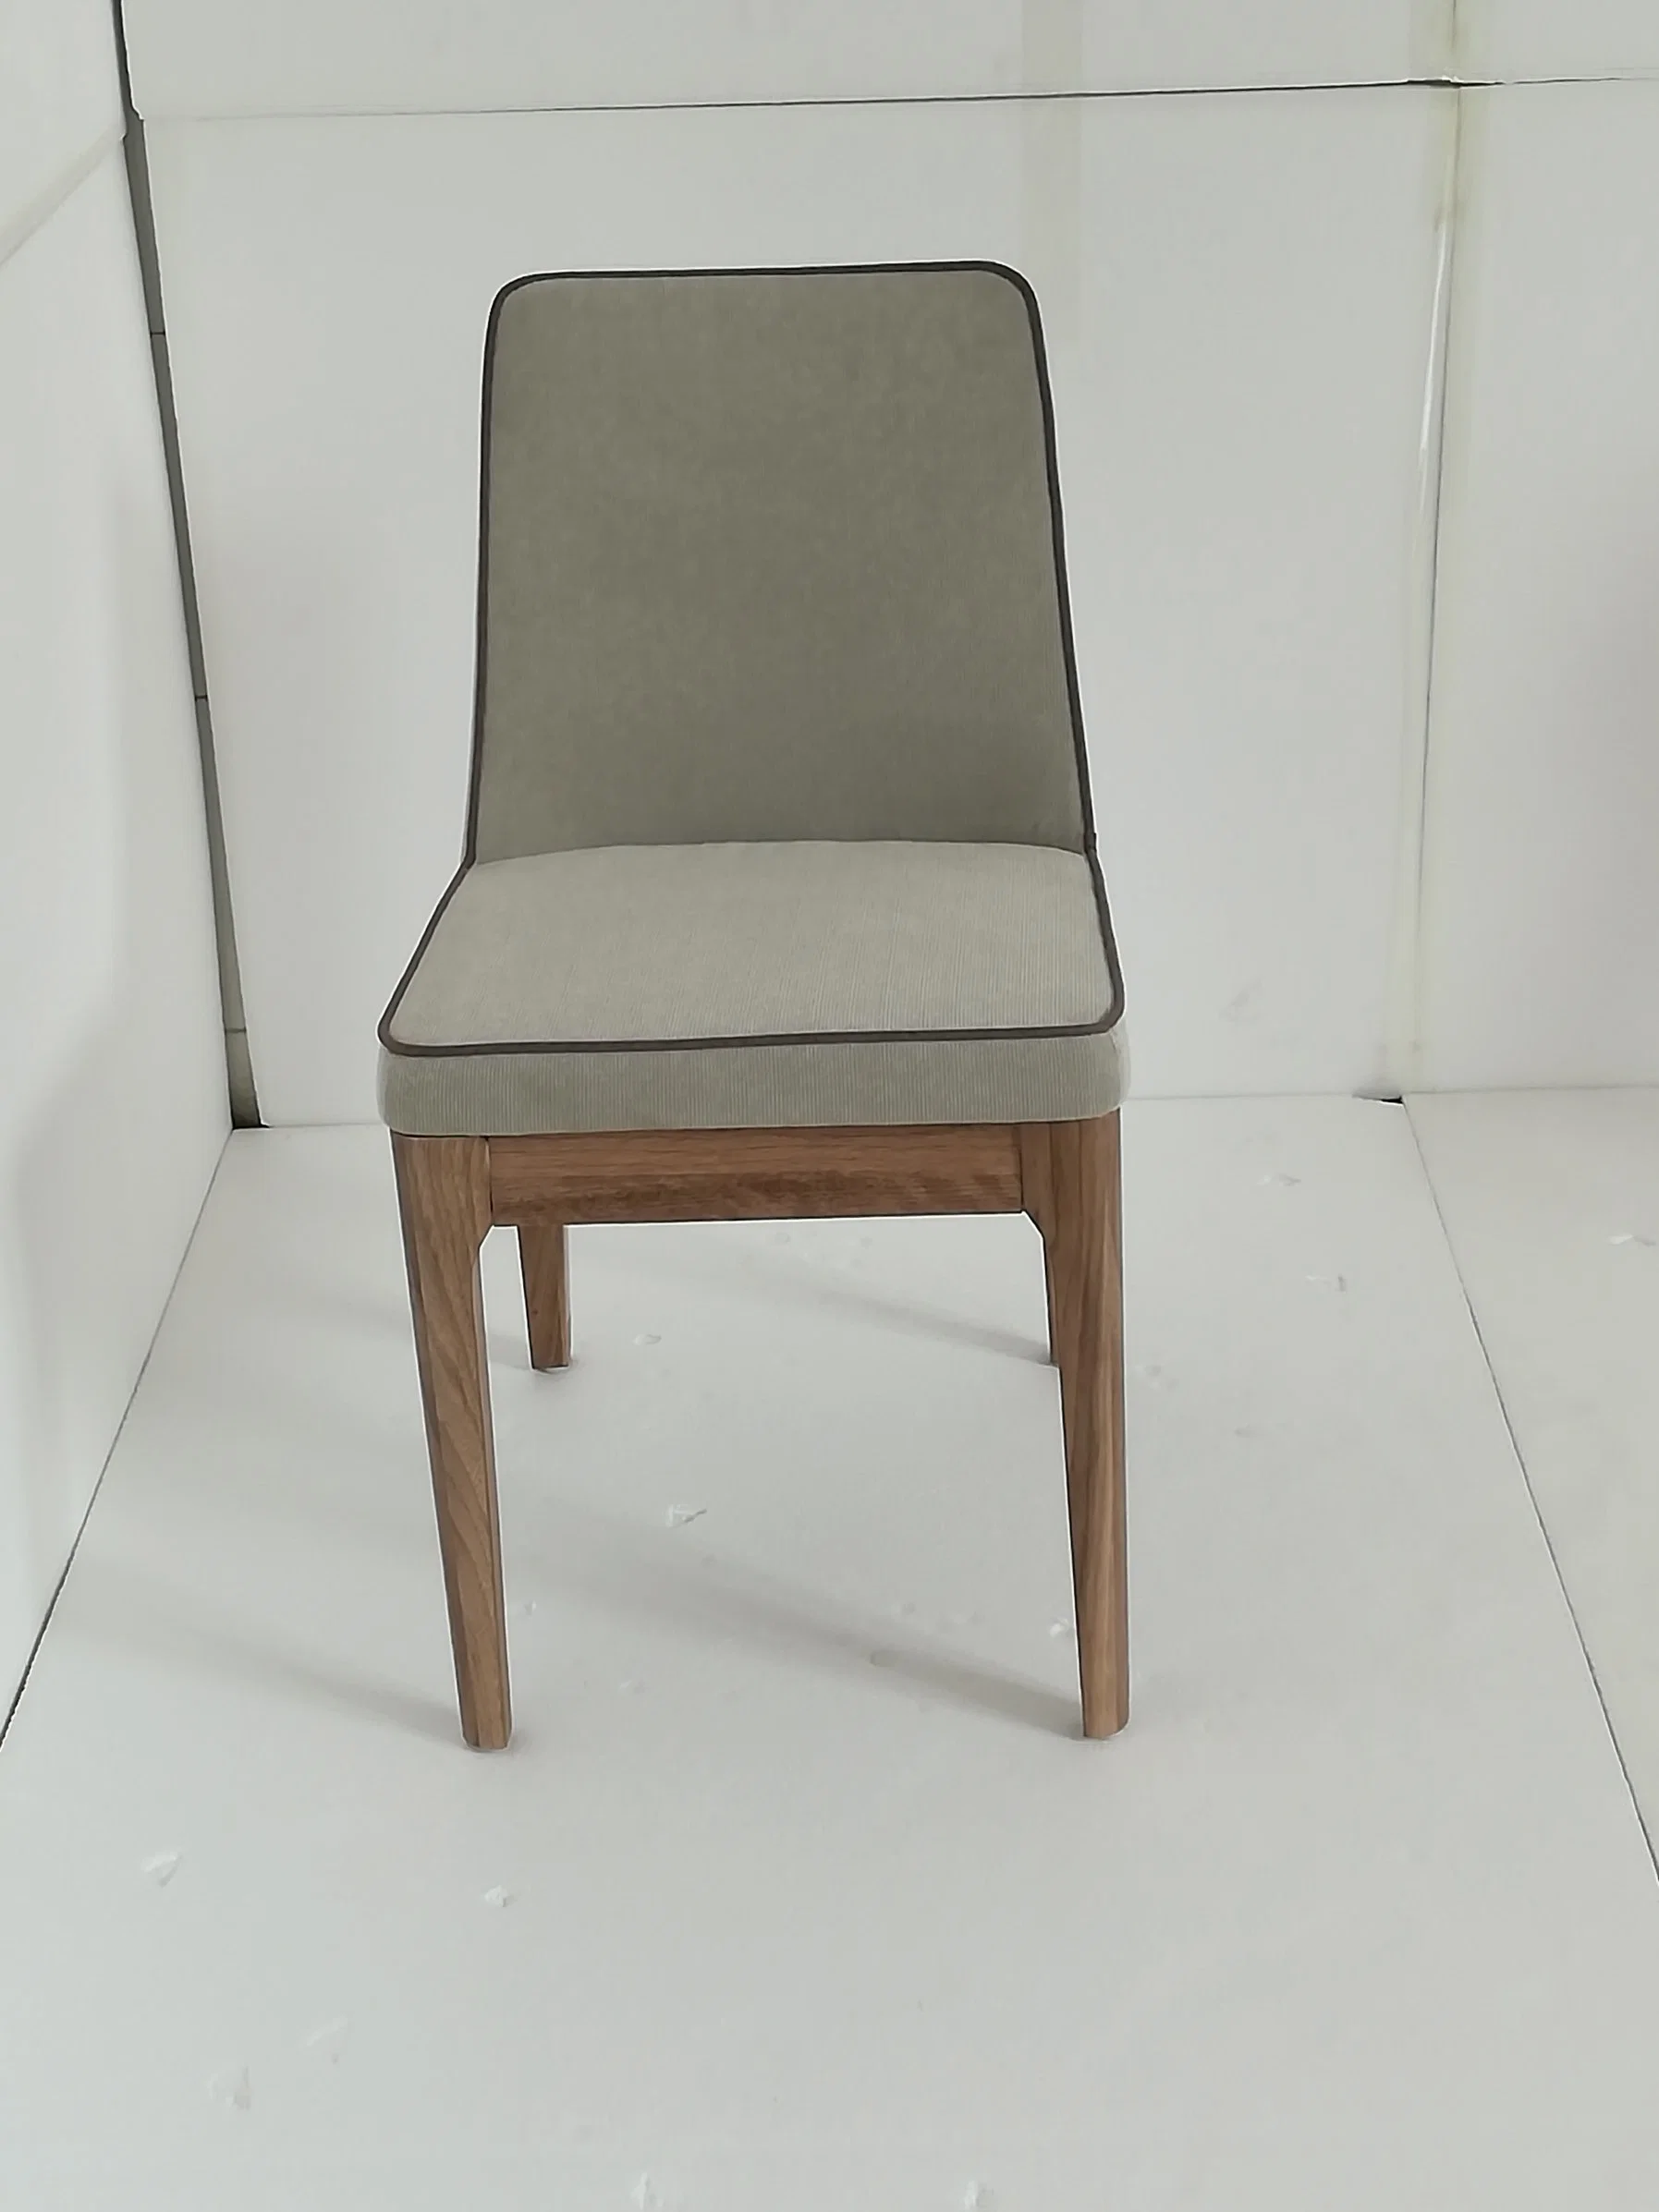 Wooden Legs Stereo Type Chairs Furniture